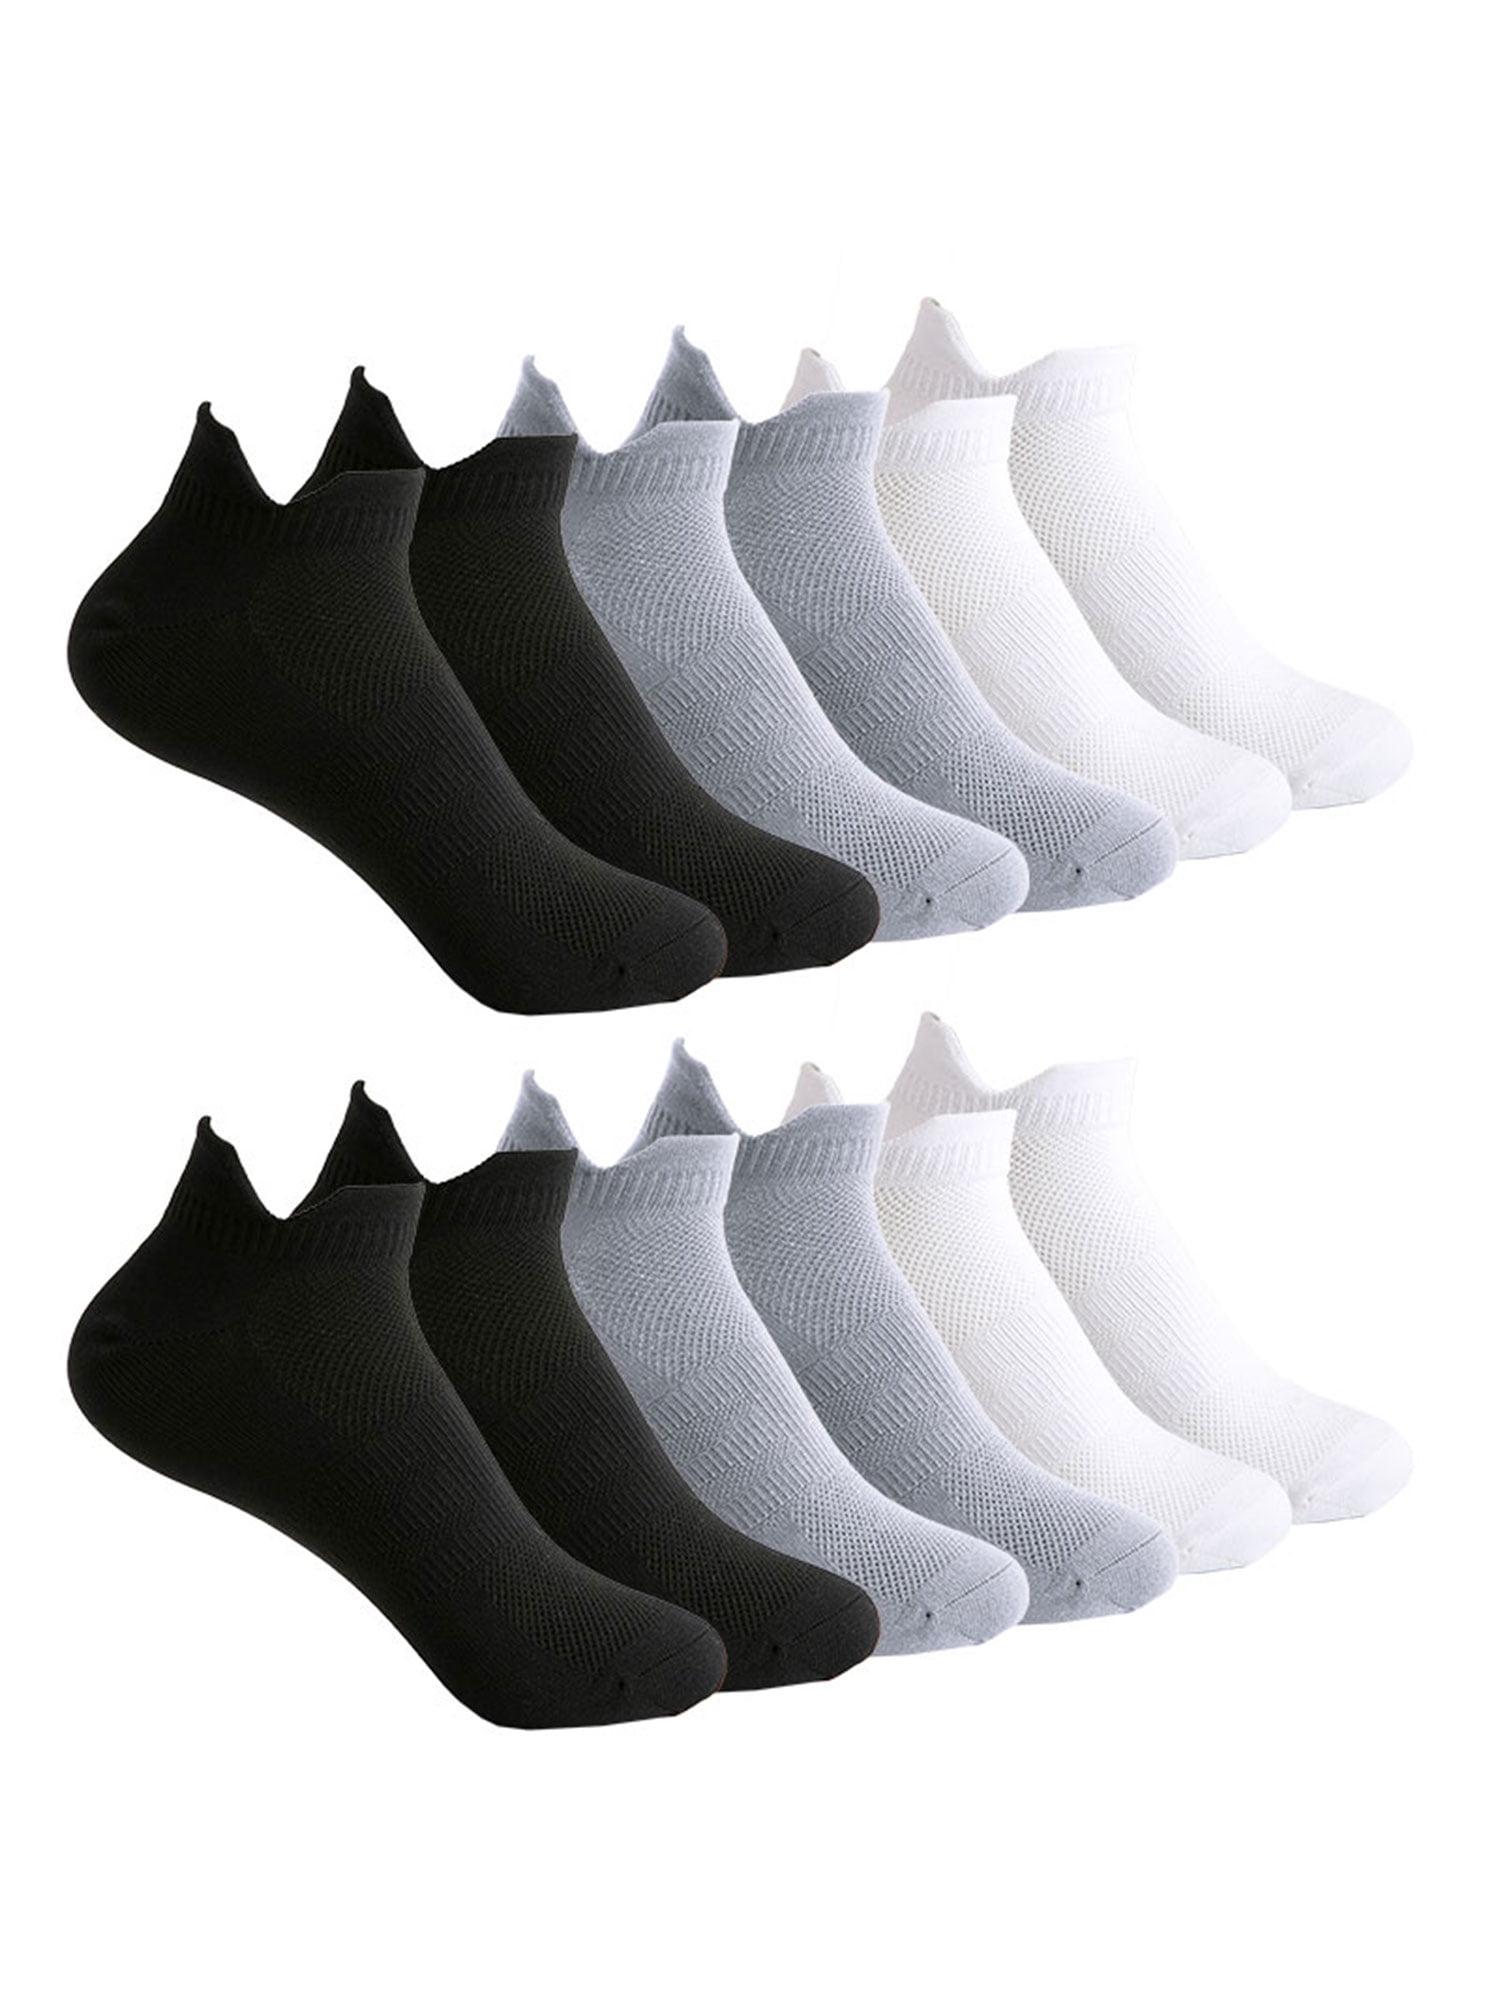 3 PAIRS MENS BLACK BREATHABLE QUALITY TRAINER LINER ANKLE SOCKS UK SIZE 6-11 